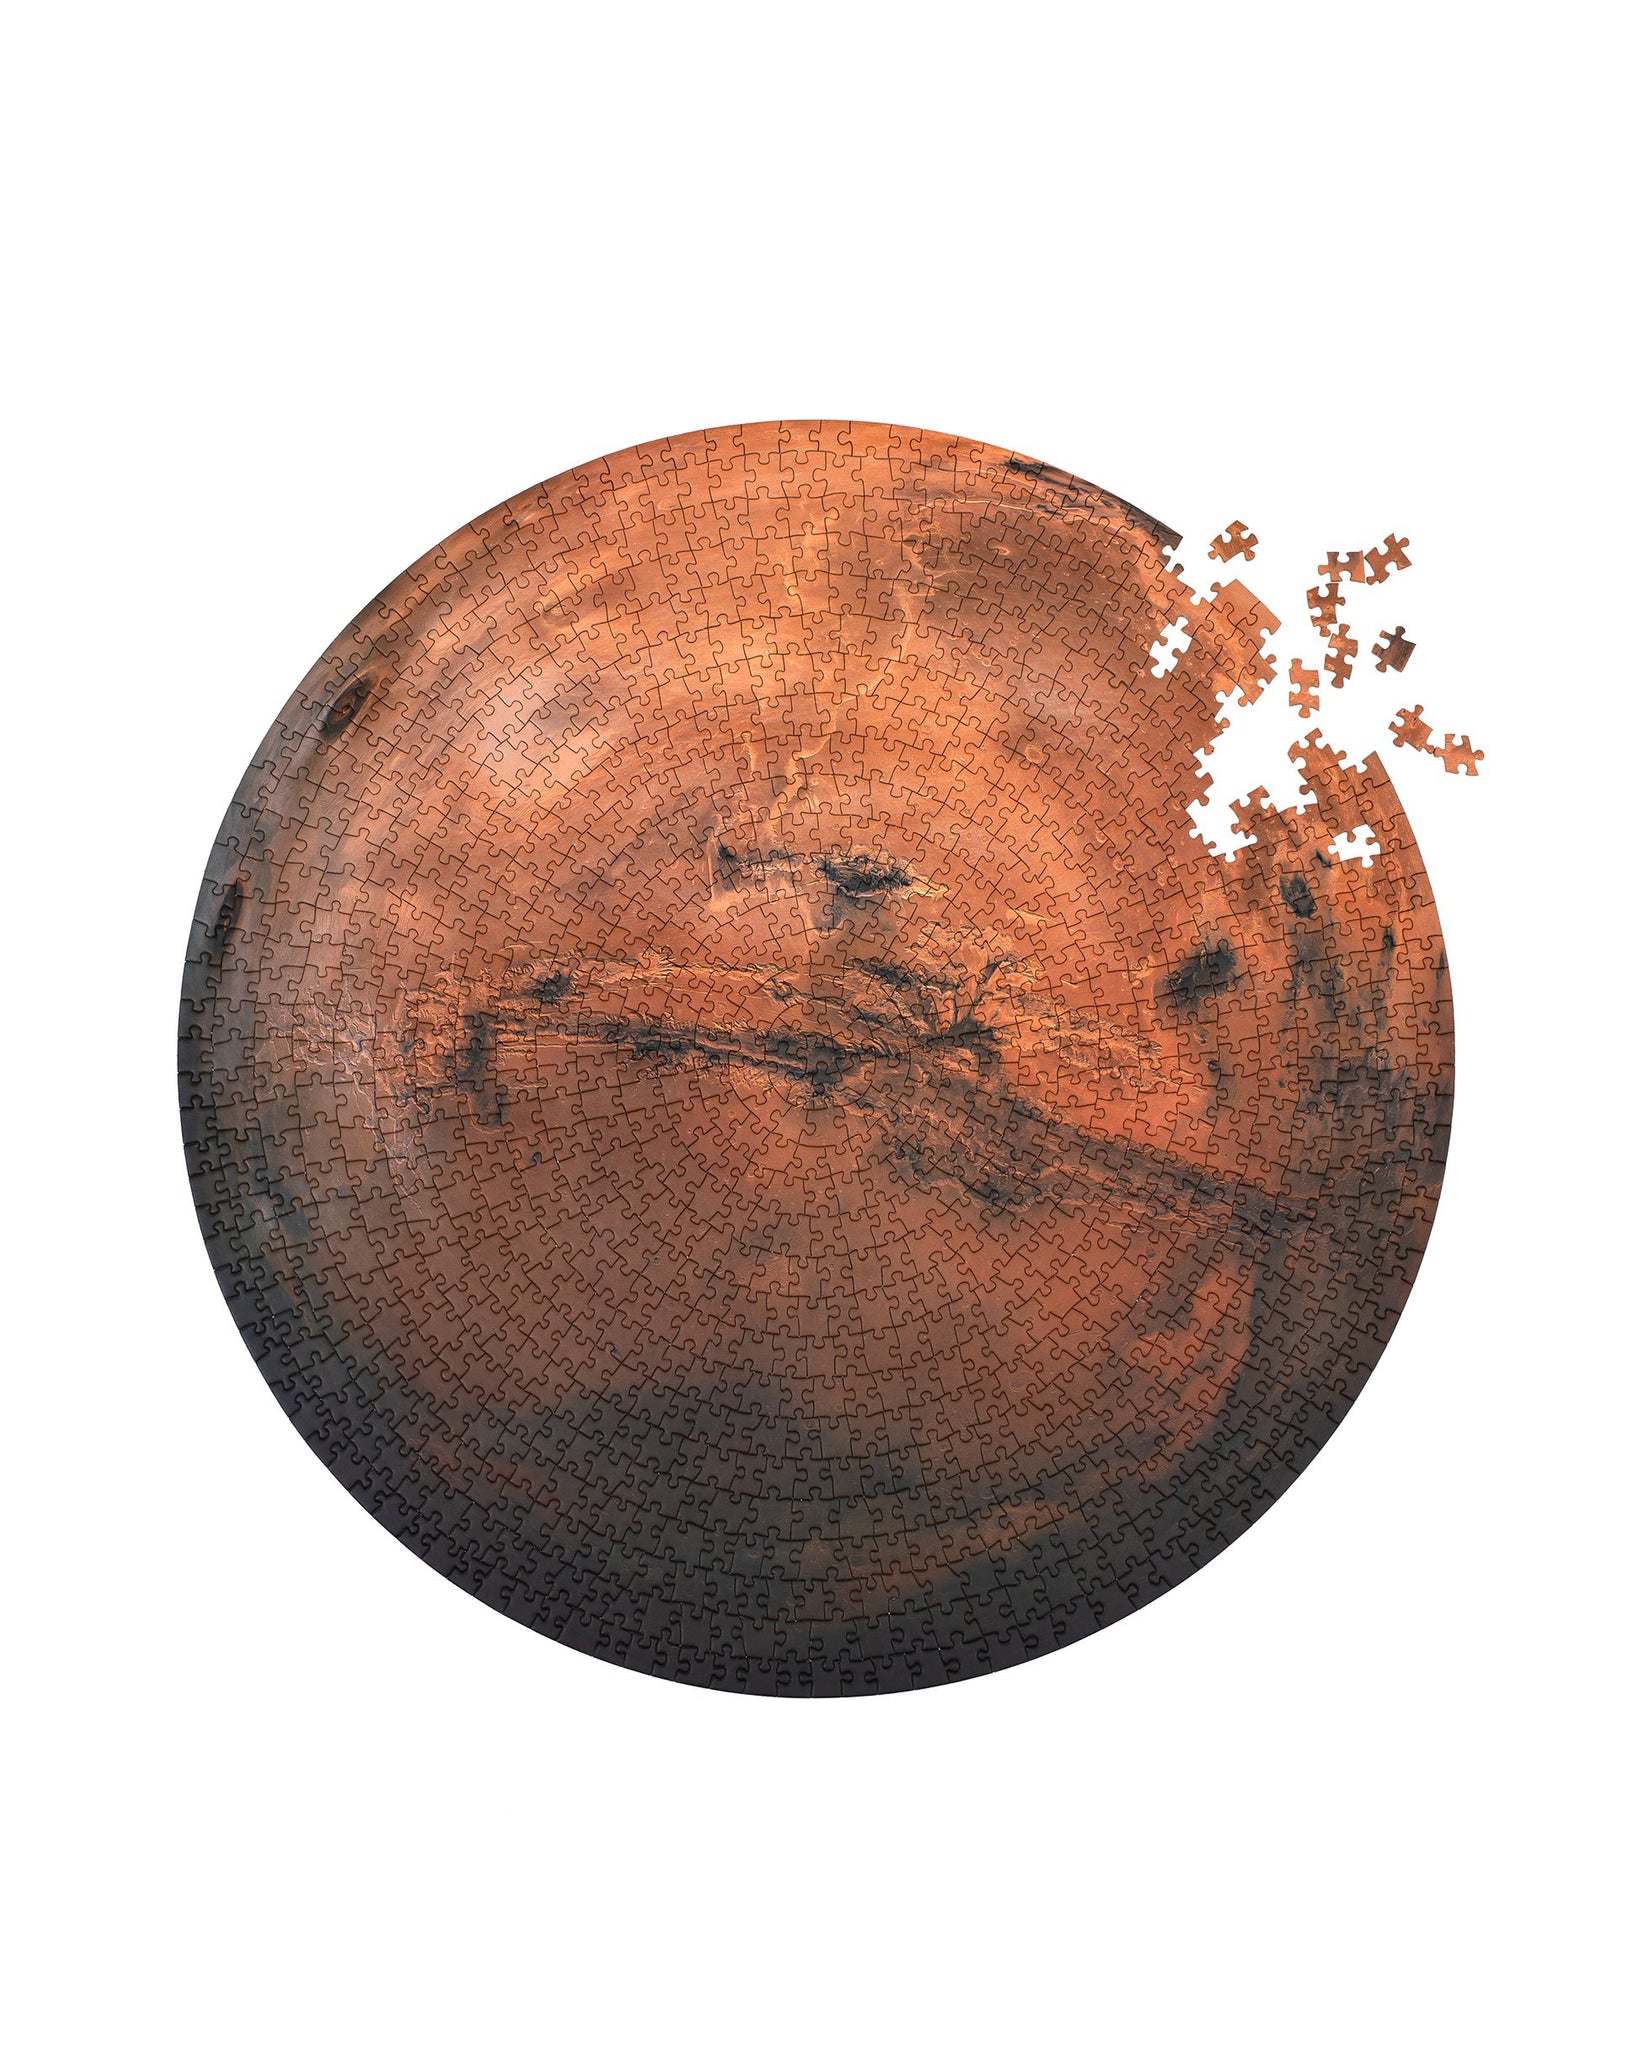 Mars Round Puzzle by Four Point Puzzles